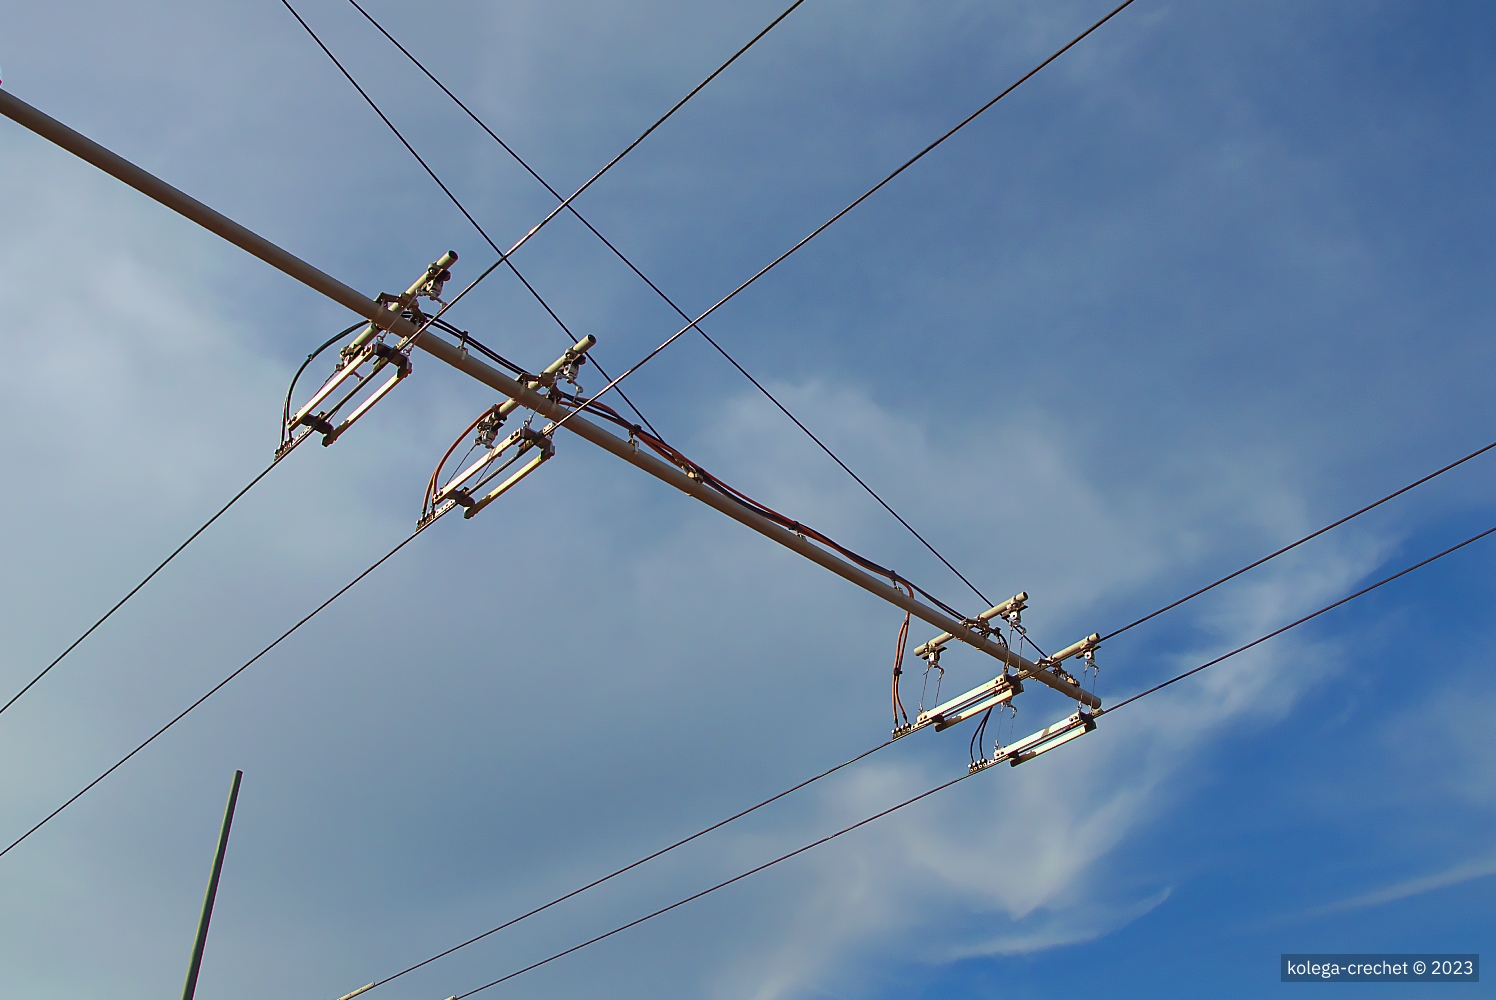 Overhead network, power supply and current collection; Castellón de la Plana — Trolleybus Lines and Infrastructure